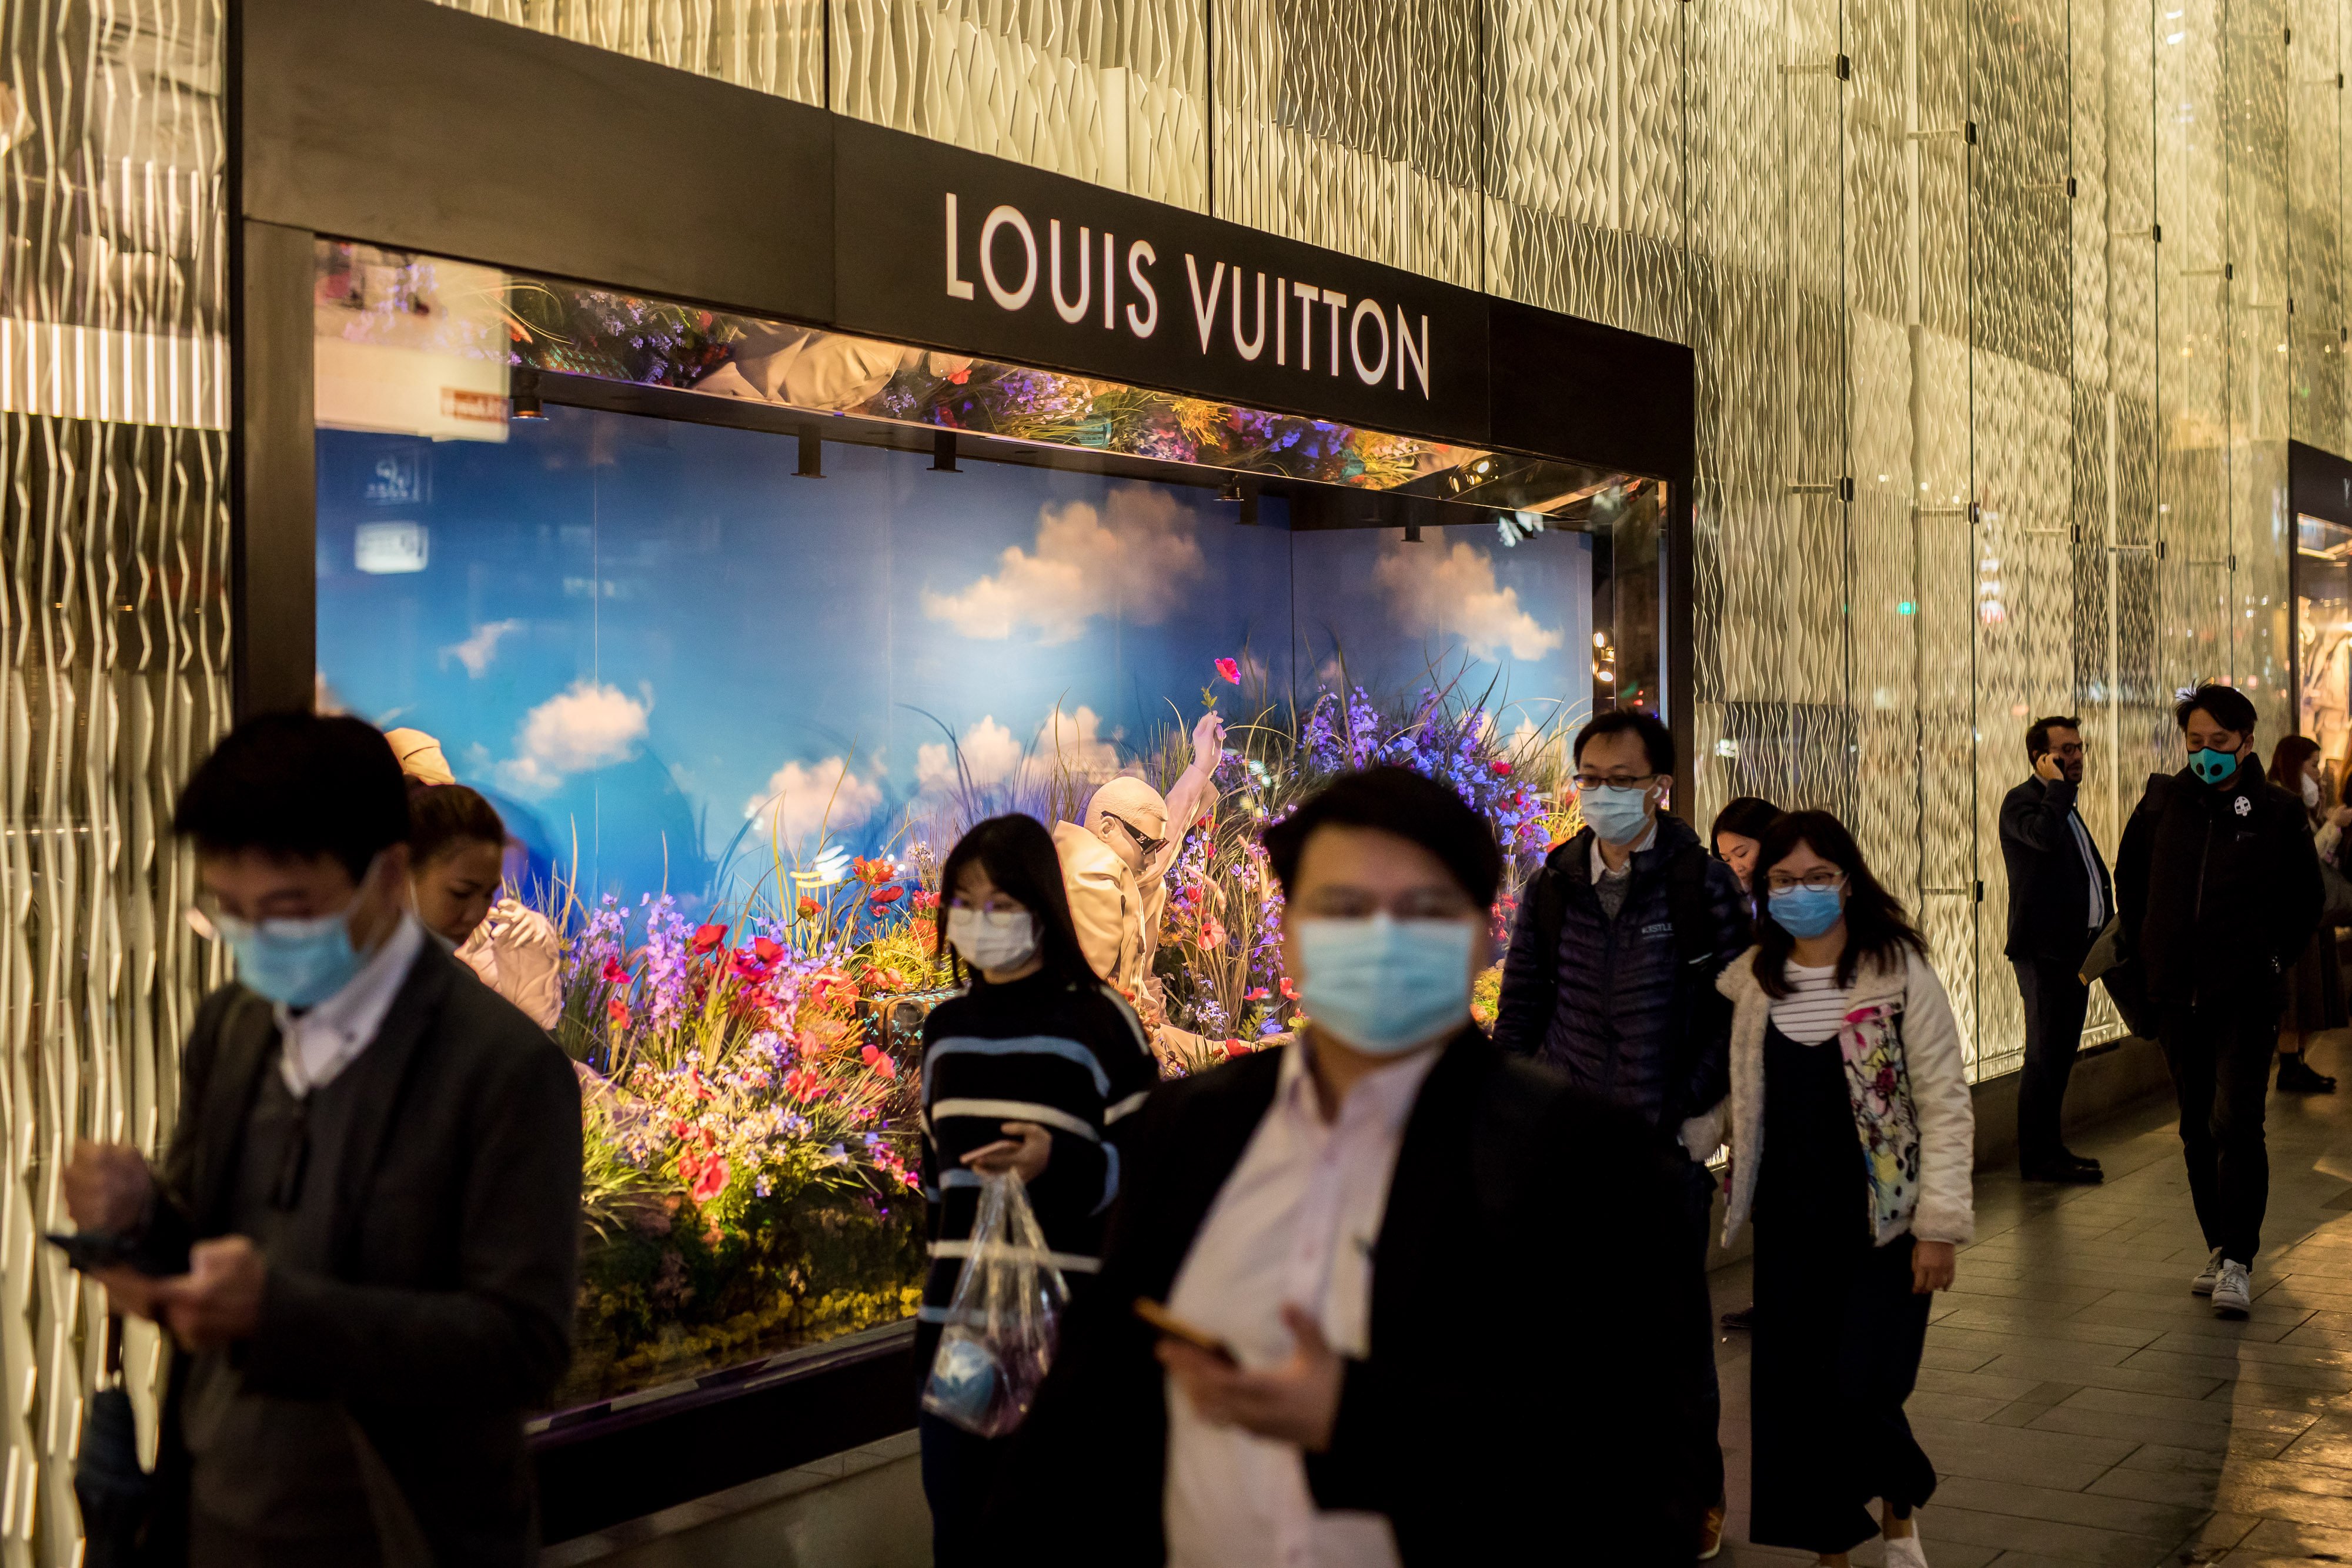 A Louis Vuitton store in Central, Hong Kong. A report has revealed that, despite economic concerns, lockdowns and travel restrictions, people in Hong Kong are spending more money on luxury goods again. Photo: Bloomberg